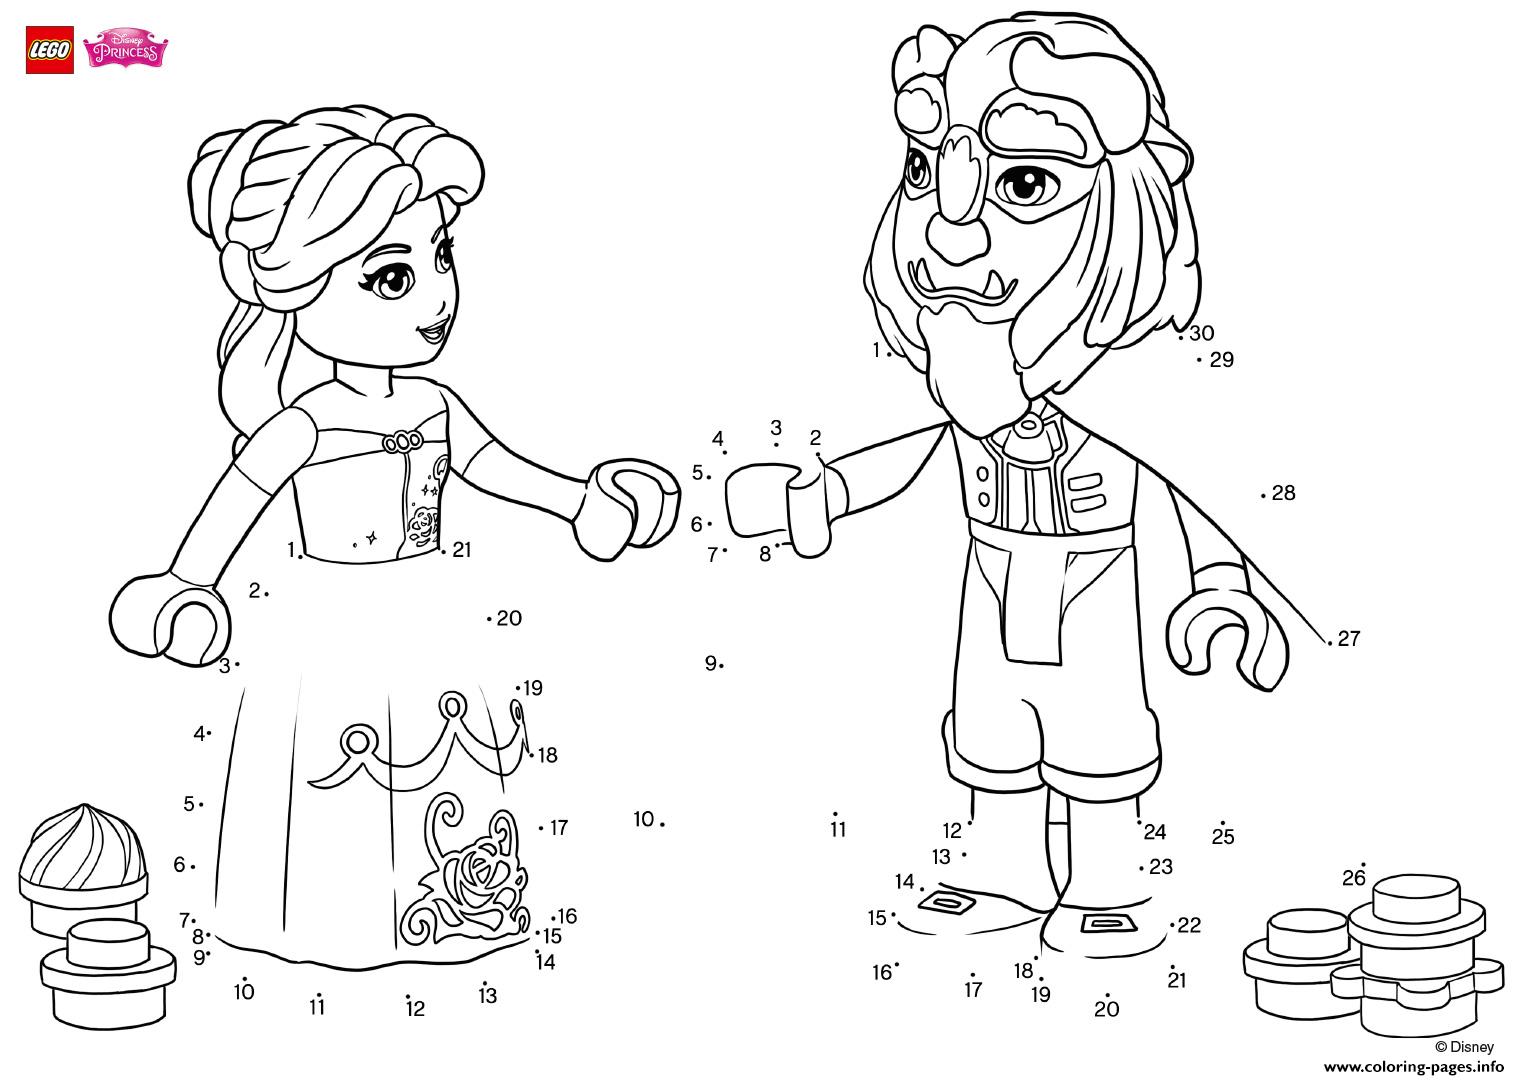 Have Fun pleting The Drawing Beauty And The Beast Lego Disney coloring pages